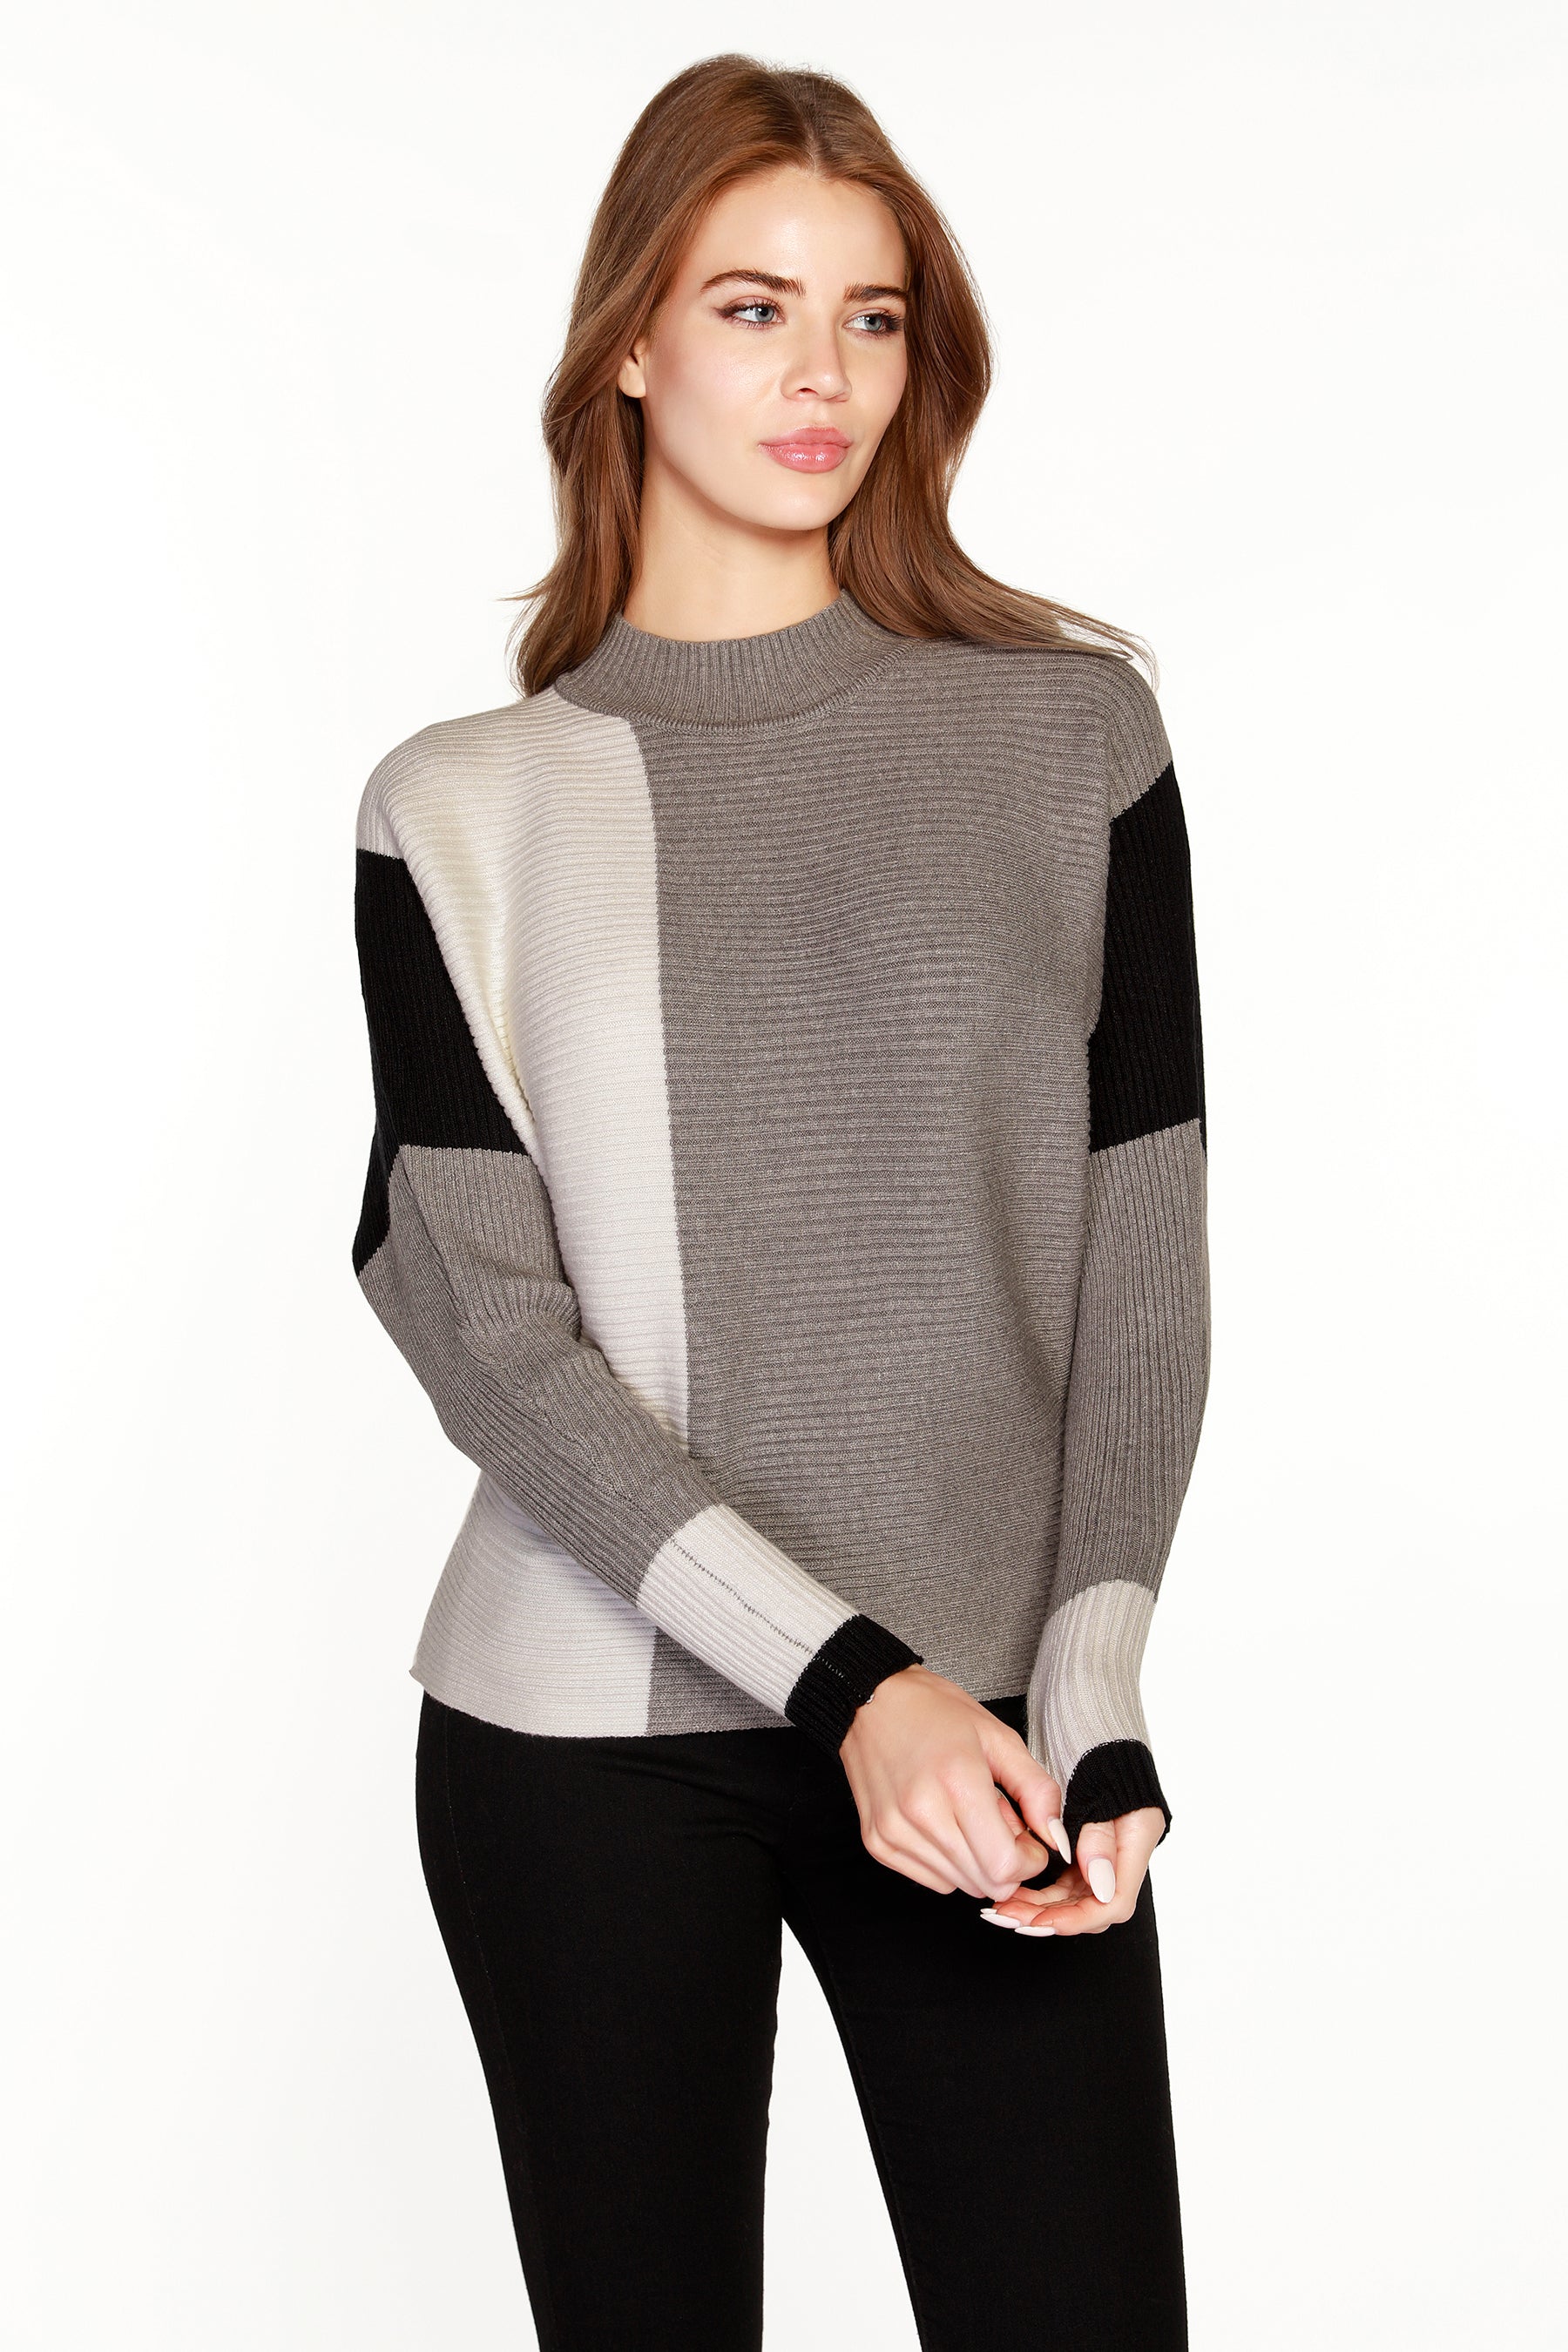 Women's Color Block Pullover Sweater with a Mock Neck